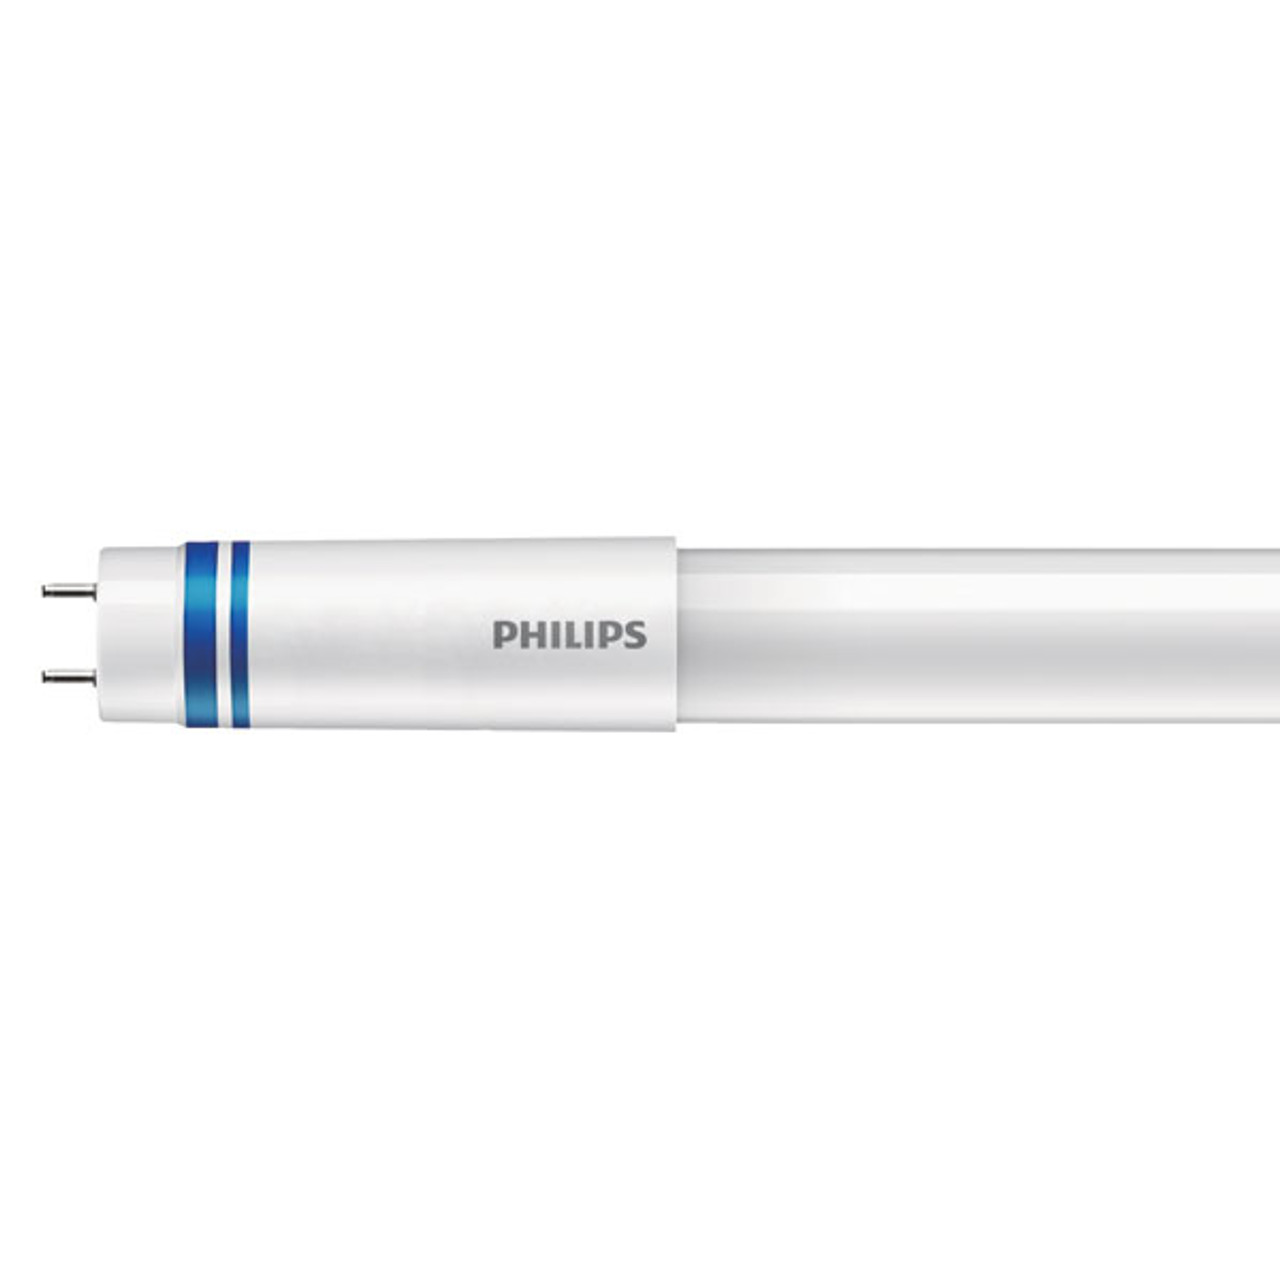 Philips 5' 22W VLE HF 865 Instant Fit Rotating Endcaps